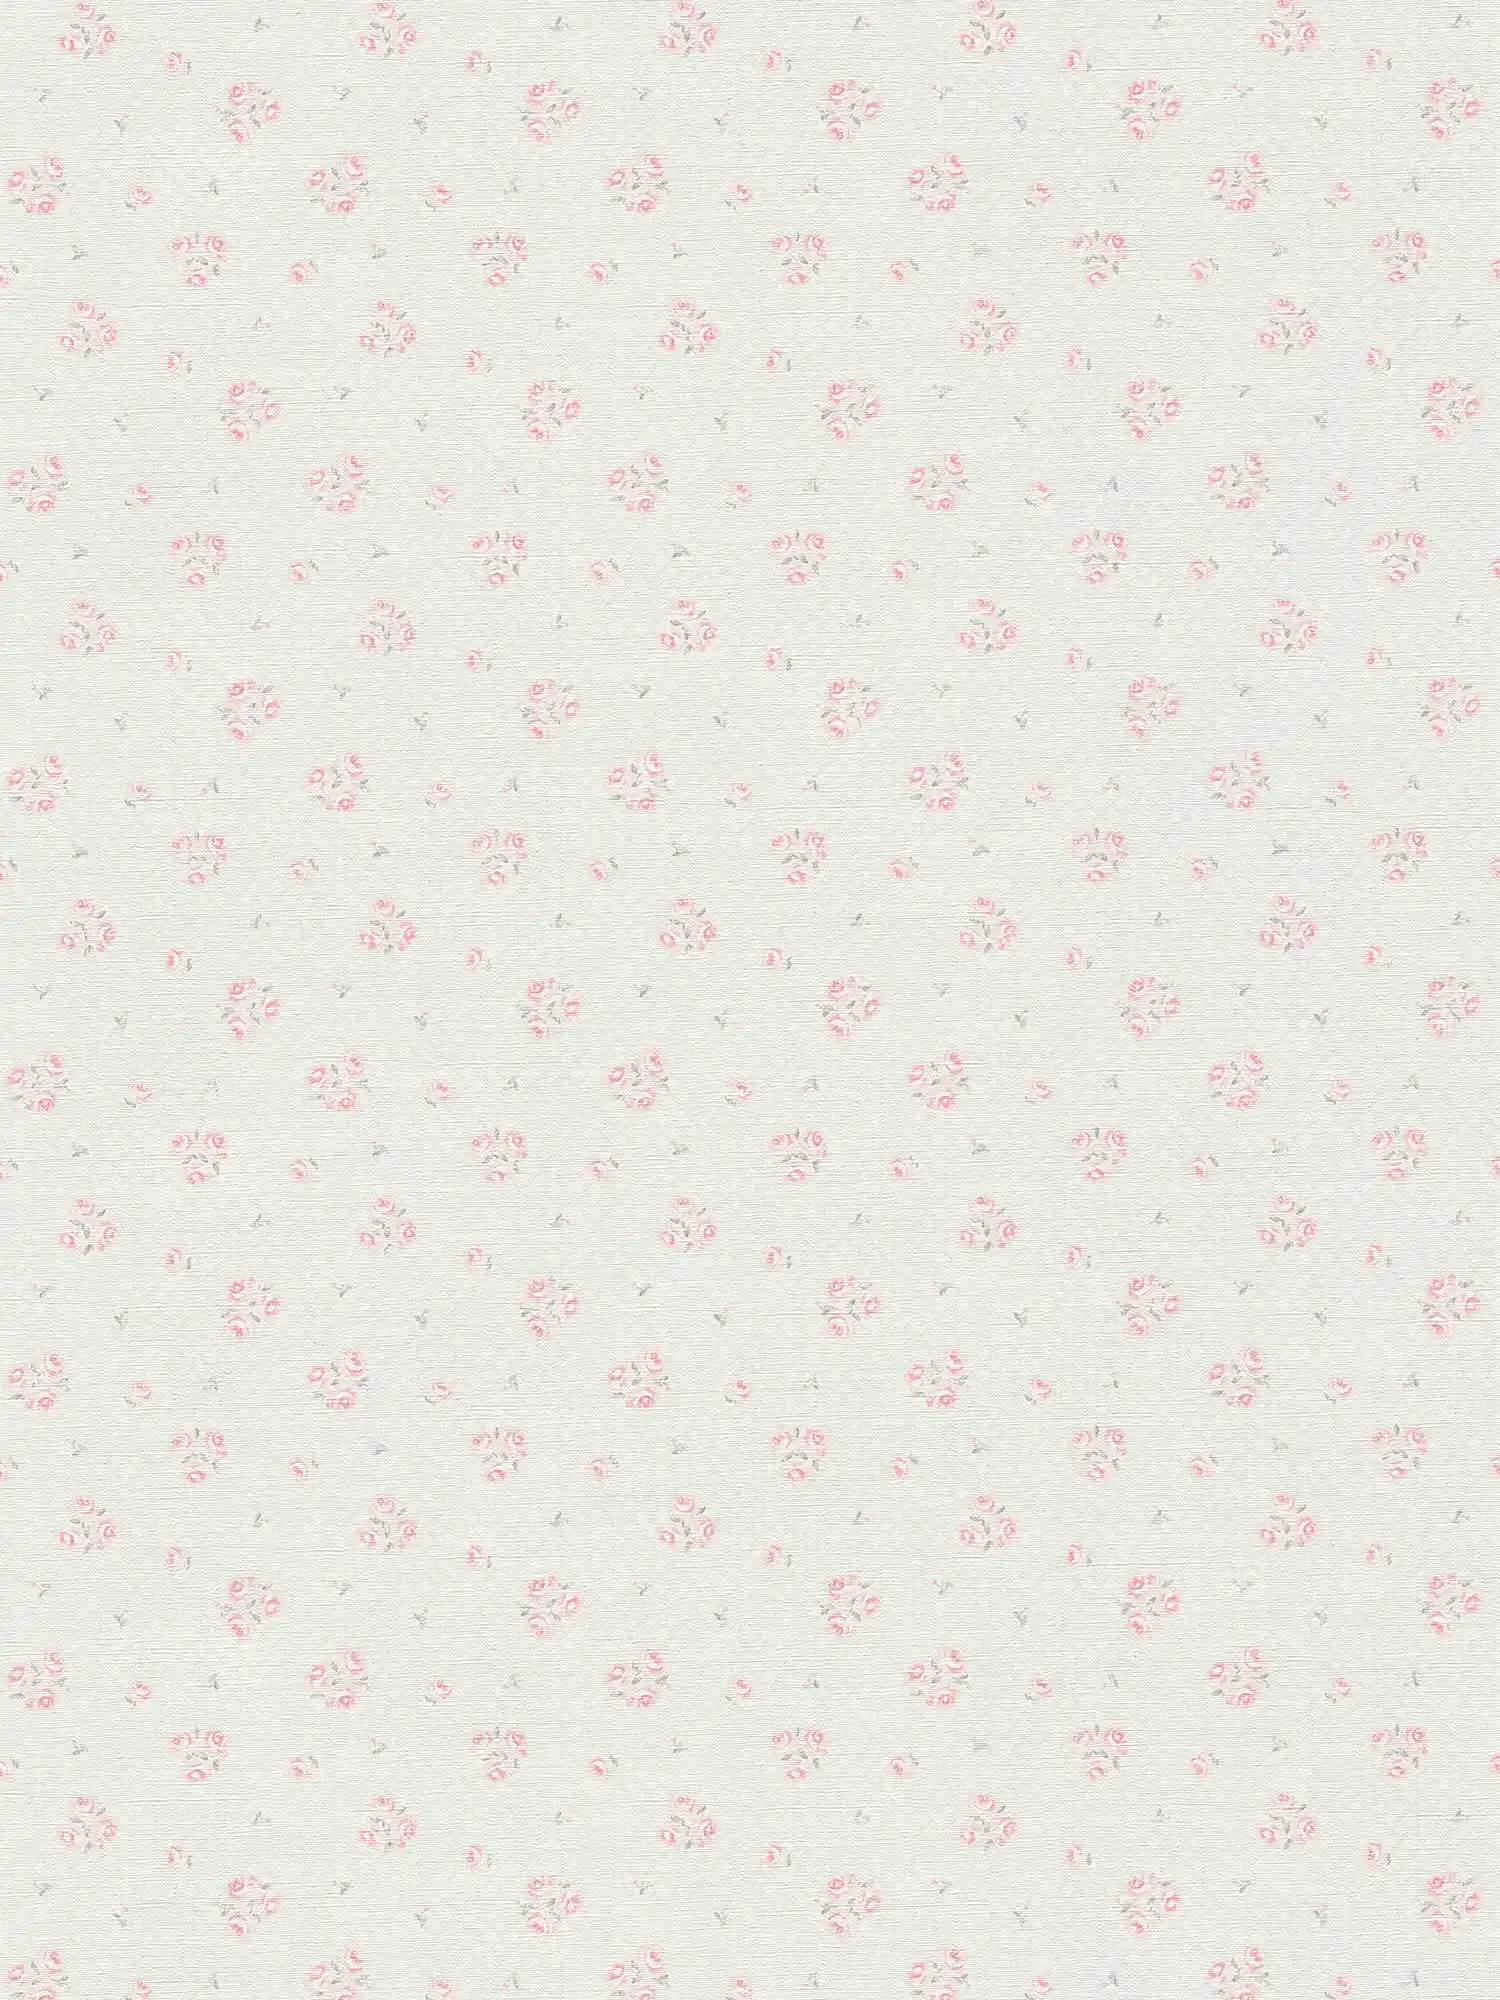 Non-woven wallpaper with fine Shabby Chic floral pattern - light grey, red, white
